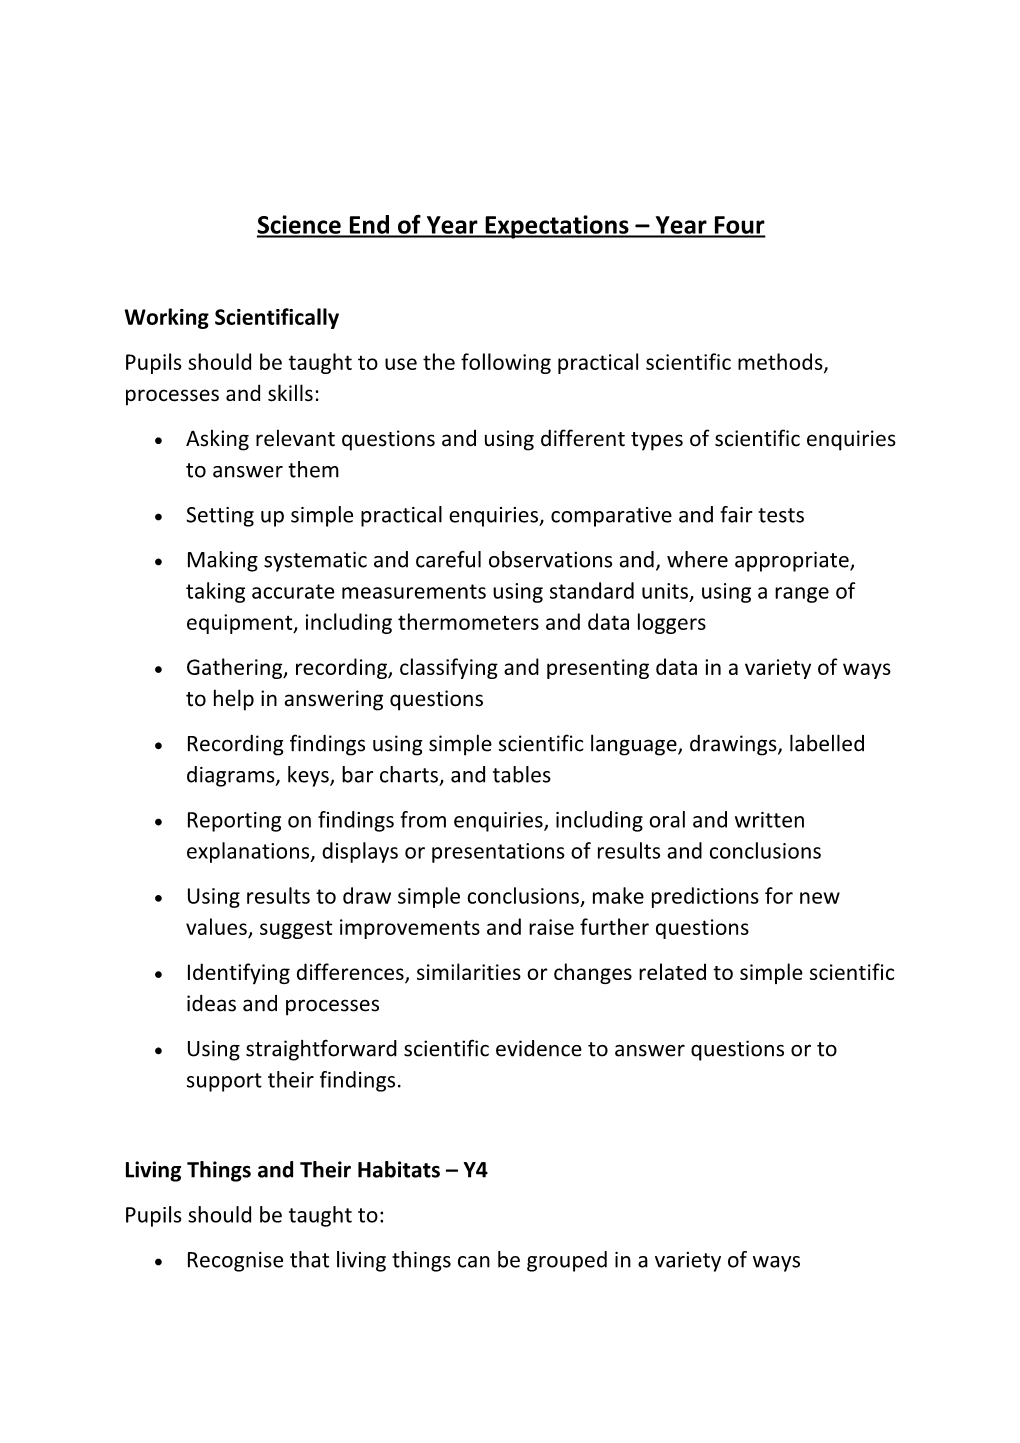 Science End of Year Expectations Year Four